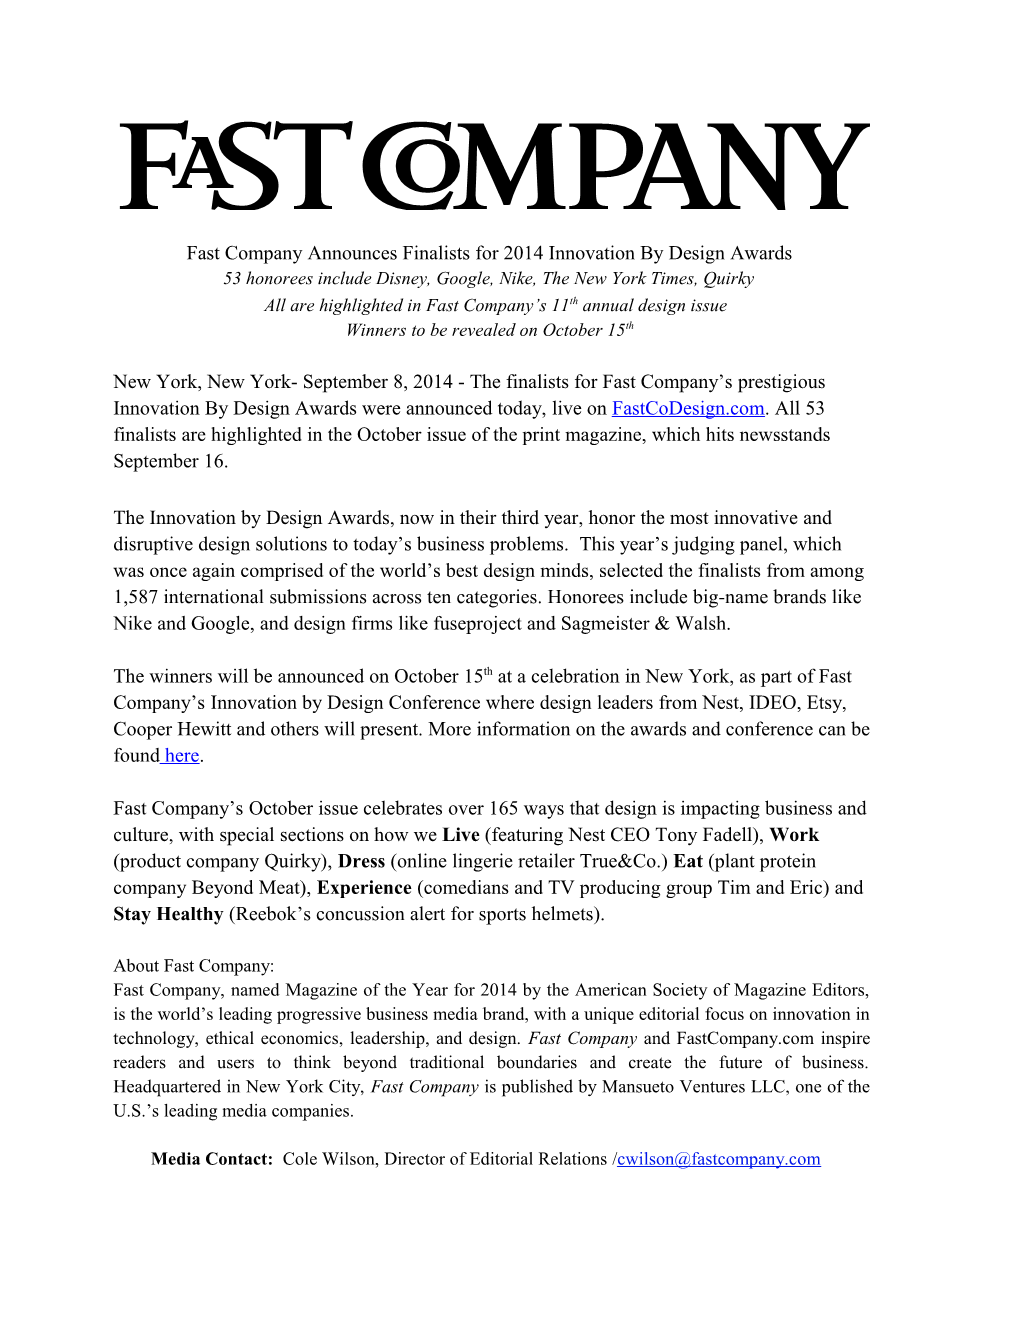 Fast Company Announces Finalists for 2014 Innovation by Design Awards